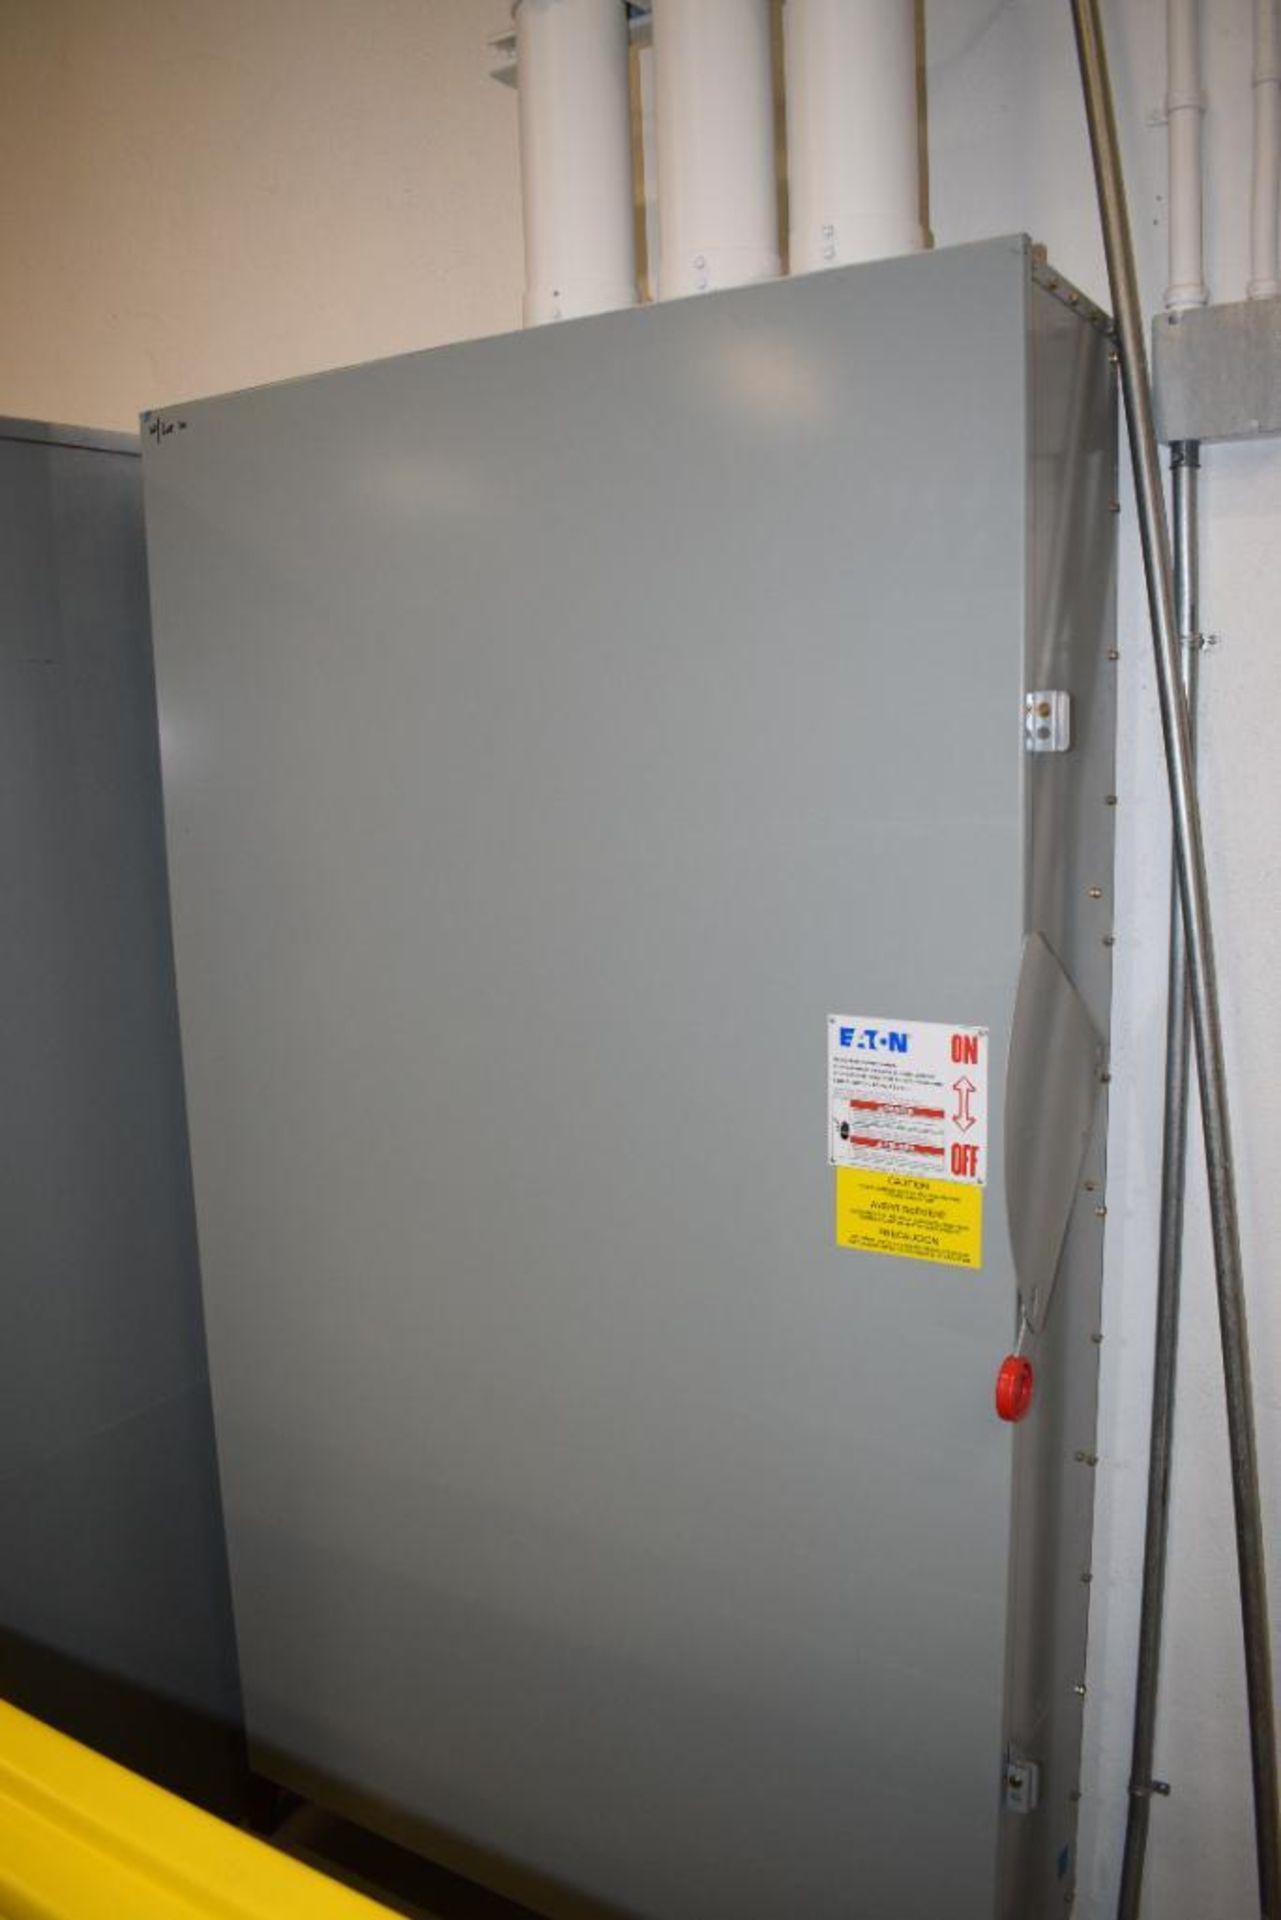 East Coast Panelboard Generator Connection Cabinet, Cat# GCP5-1600S3-2F. Amps 1600A, volts 480/277V, - Image 5 of 6